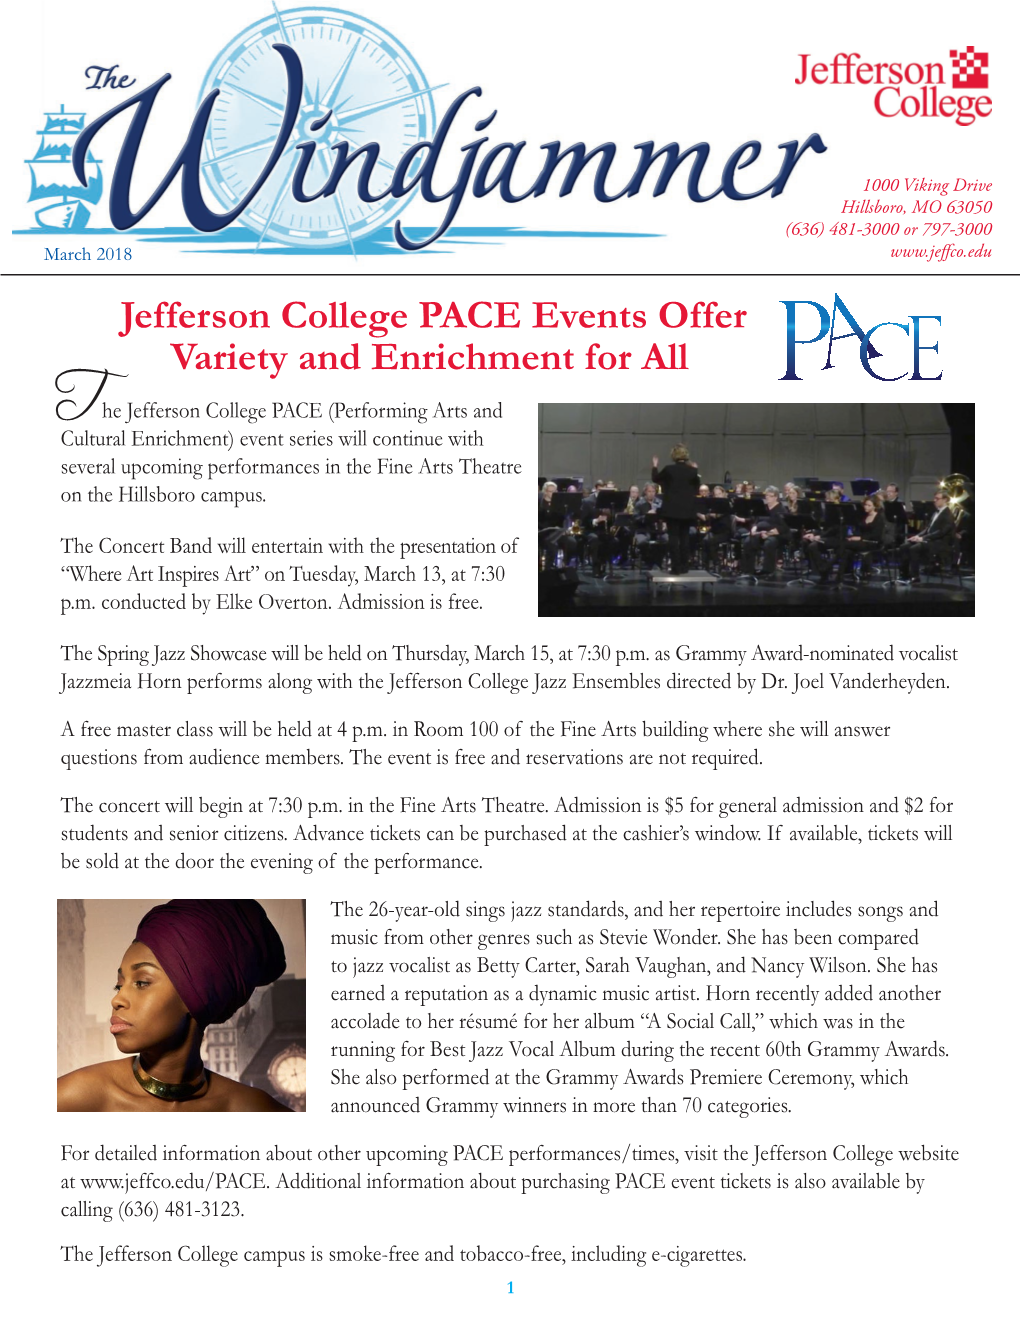 Jefferson College PACE Events Offer Variety and Enrichment for All